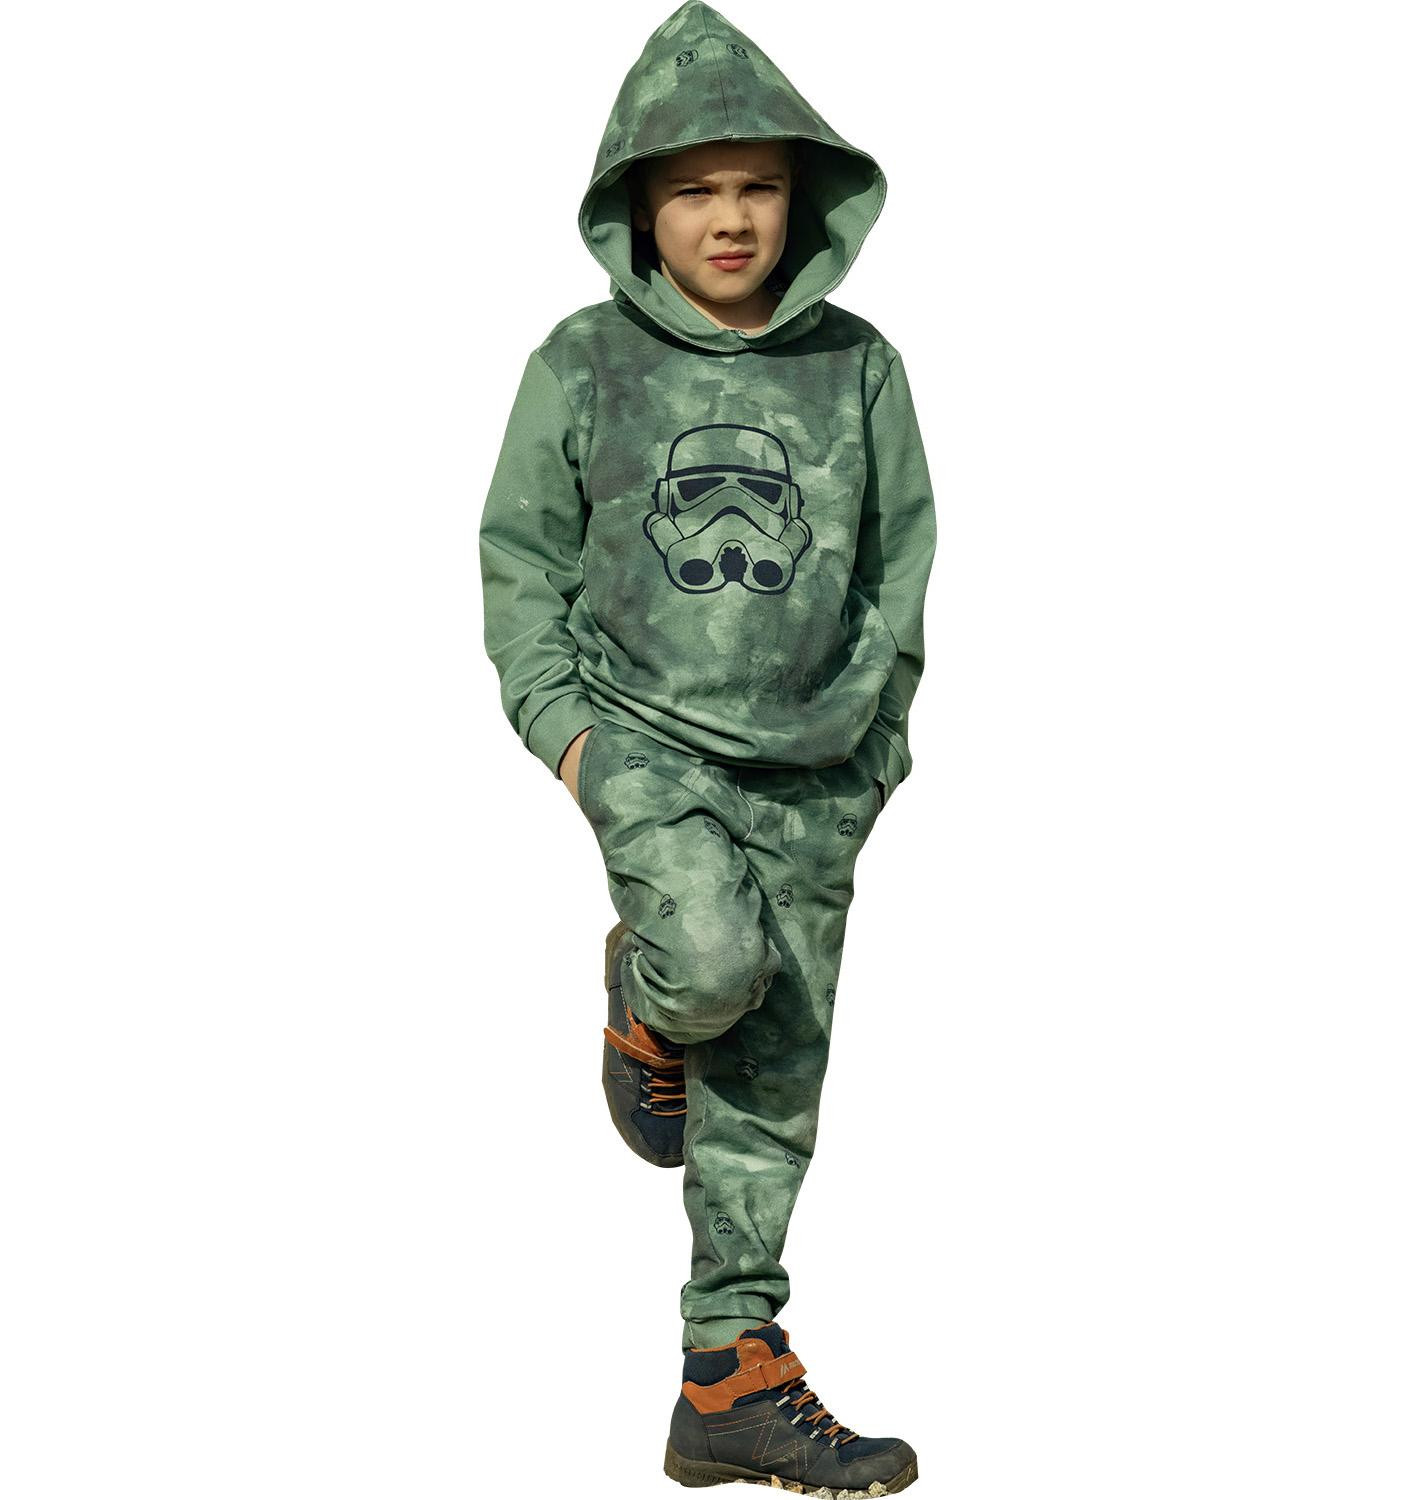 Children's tracksuit (OSLO) - BE BRAVE (BE YOURSELF) / M-01 melange light grey - looped knit fabric 